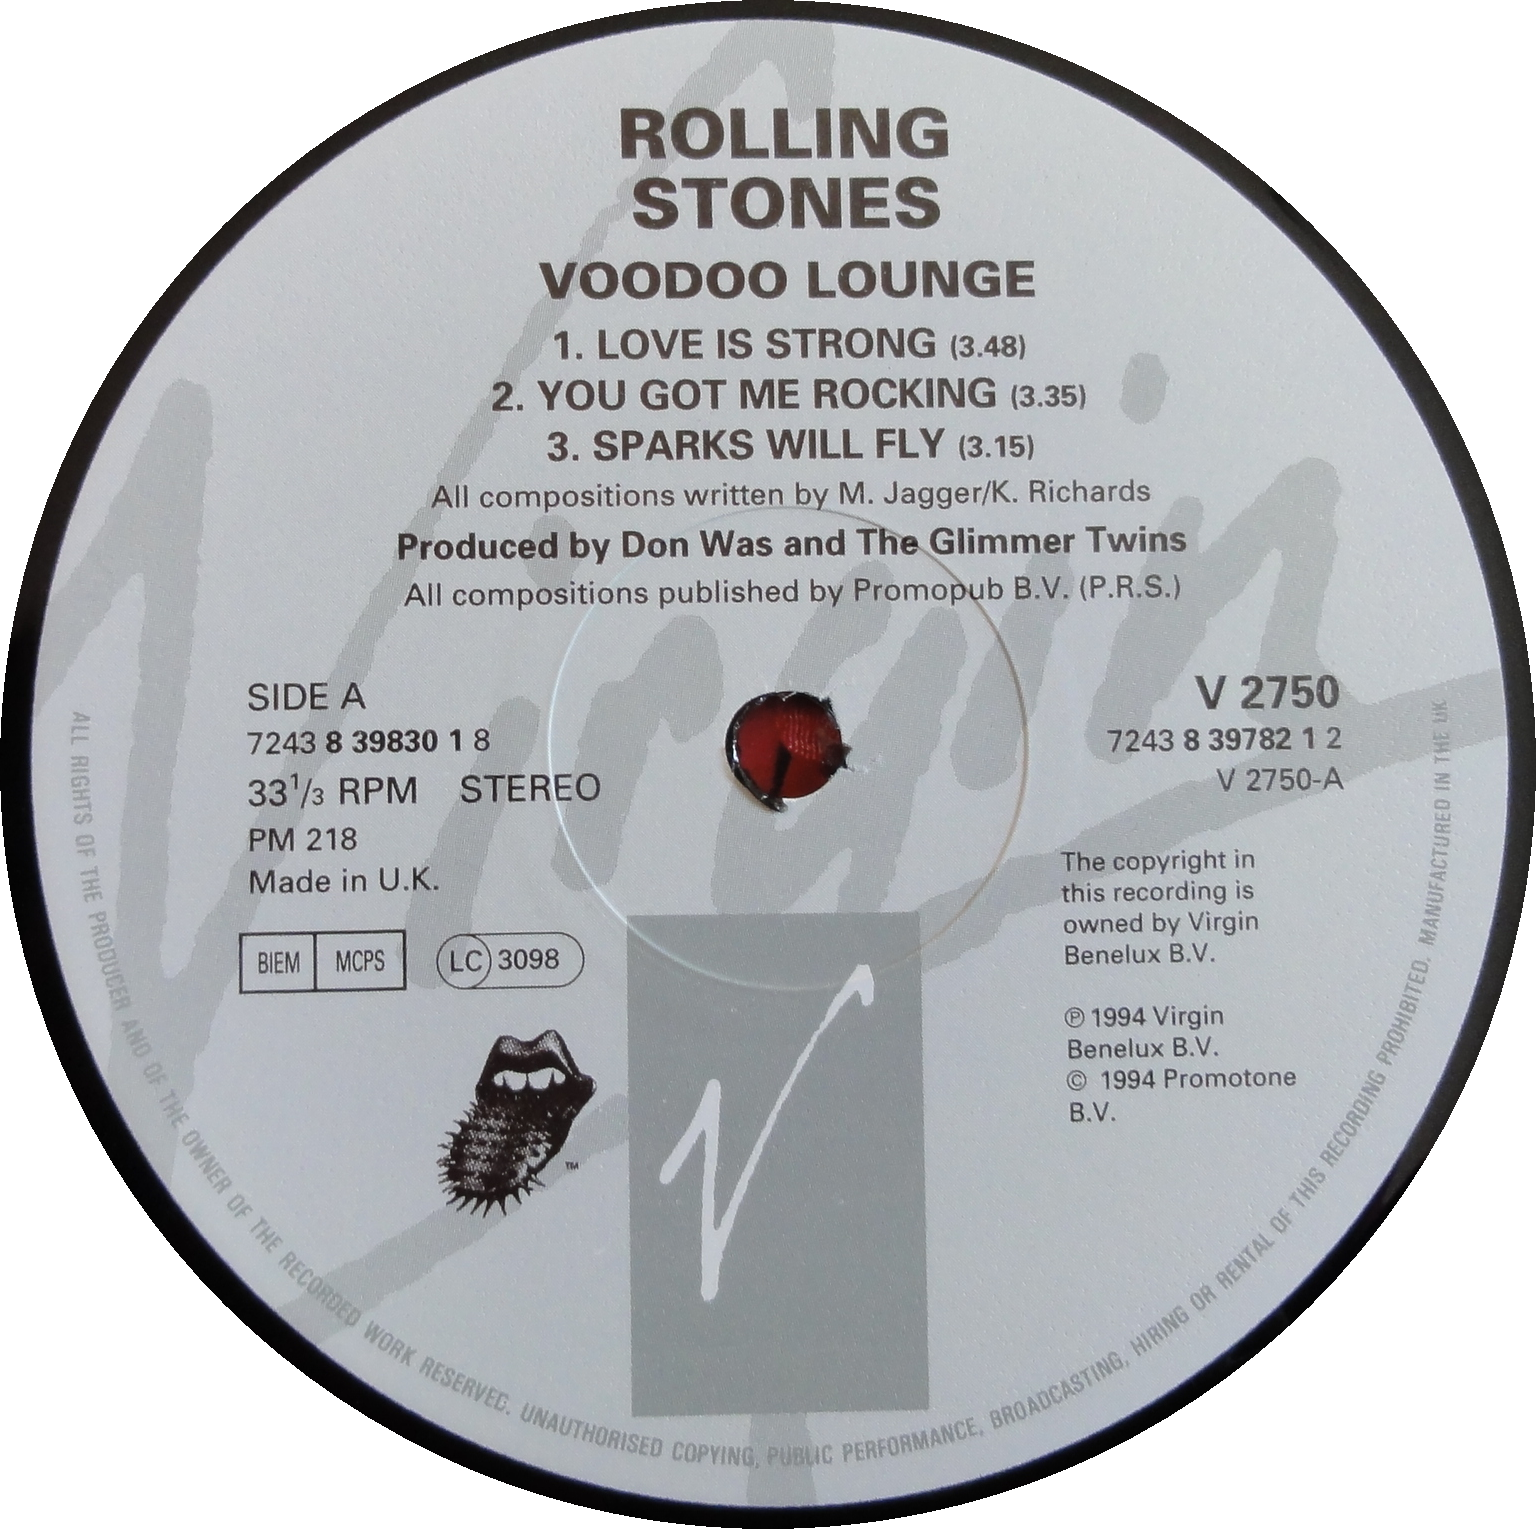 The Rolling Stones Voodoo Lounge 1994. Rolling Stones "Voodoo Lounge". Rolling Stones Voodoo Lounge обложка альбома. 1994 - Voodoo Lounge. Rolling stone love